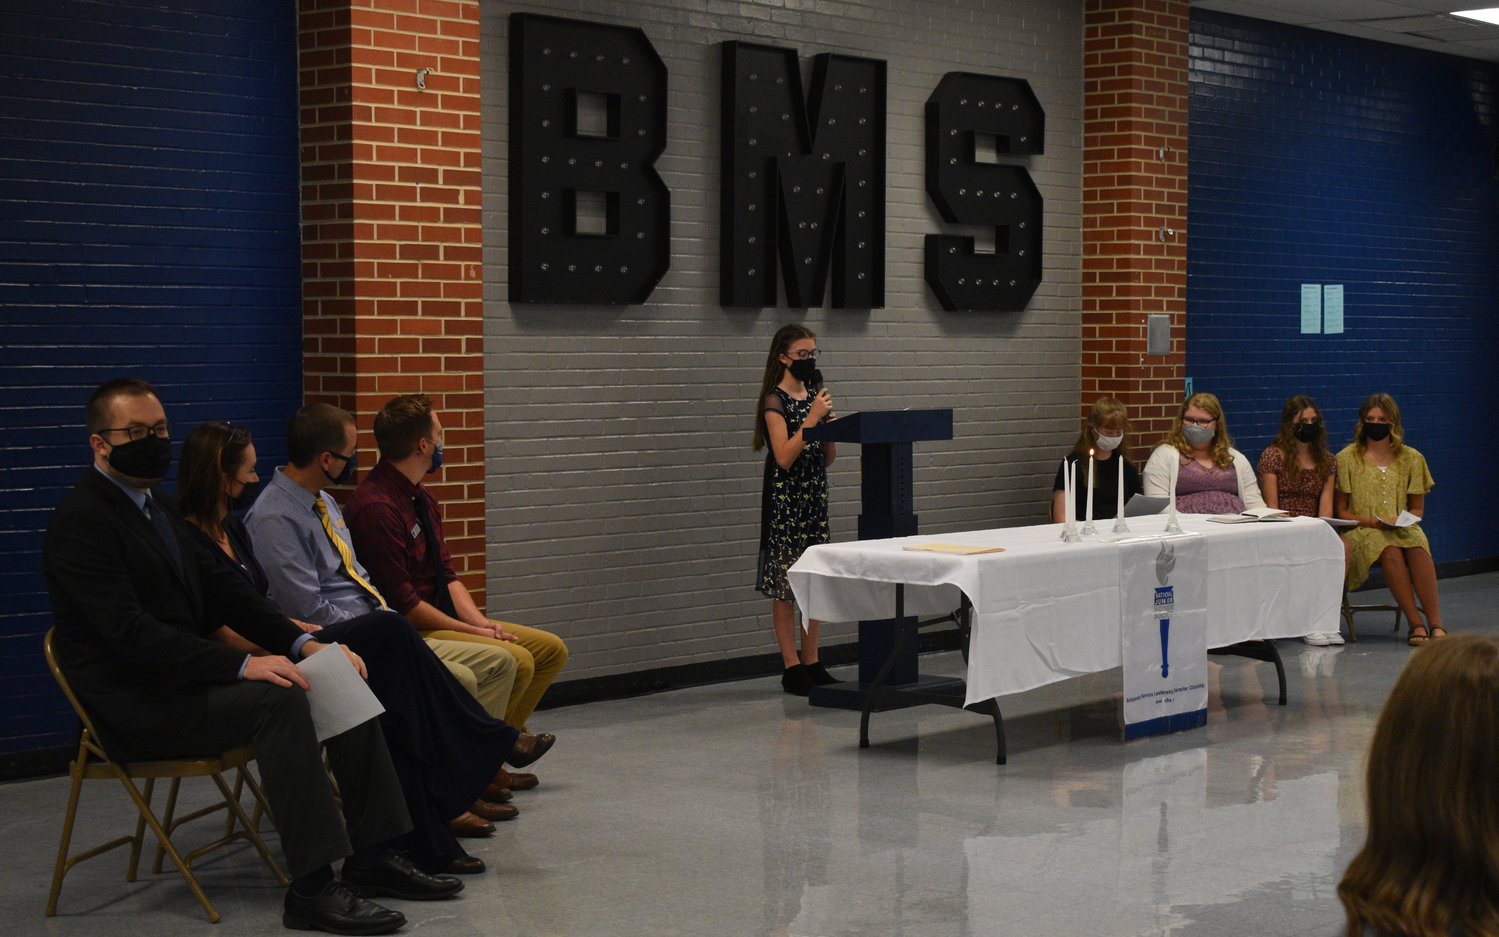 Bolivar Middle School NJHS chapter president Tessa Ludden welcomes the crowd of family and friends to the induction ceremony Monday, Oct. 18. Also pictured are, from left, advisers Dakota Twenter and Annette Fugitt, principal Tim Garber, assistant principal Benjamin Potter, vice-president Jaylee Bryant, secretary Chloe Way and members Rhyan Roberts and DeLaney Daniels.